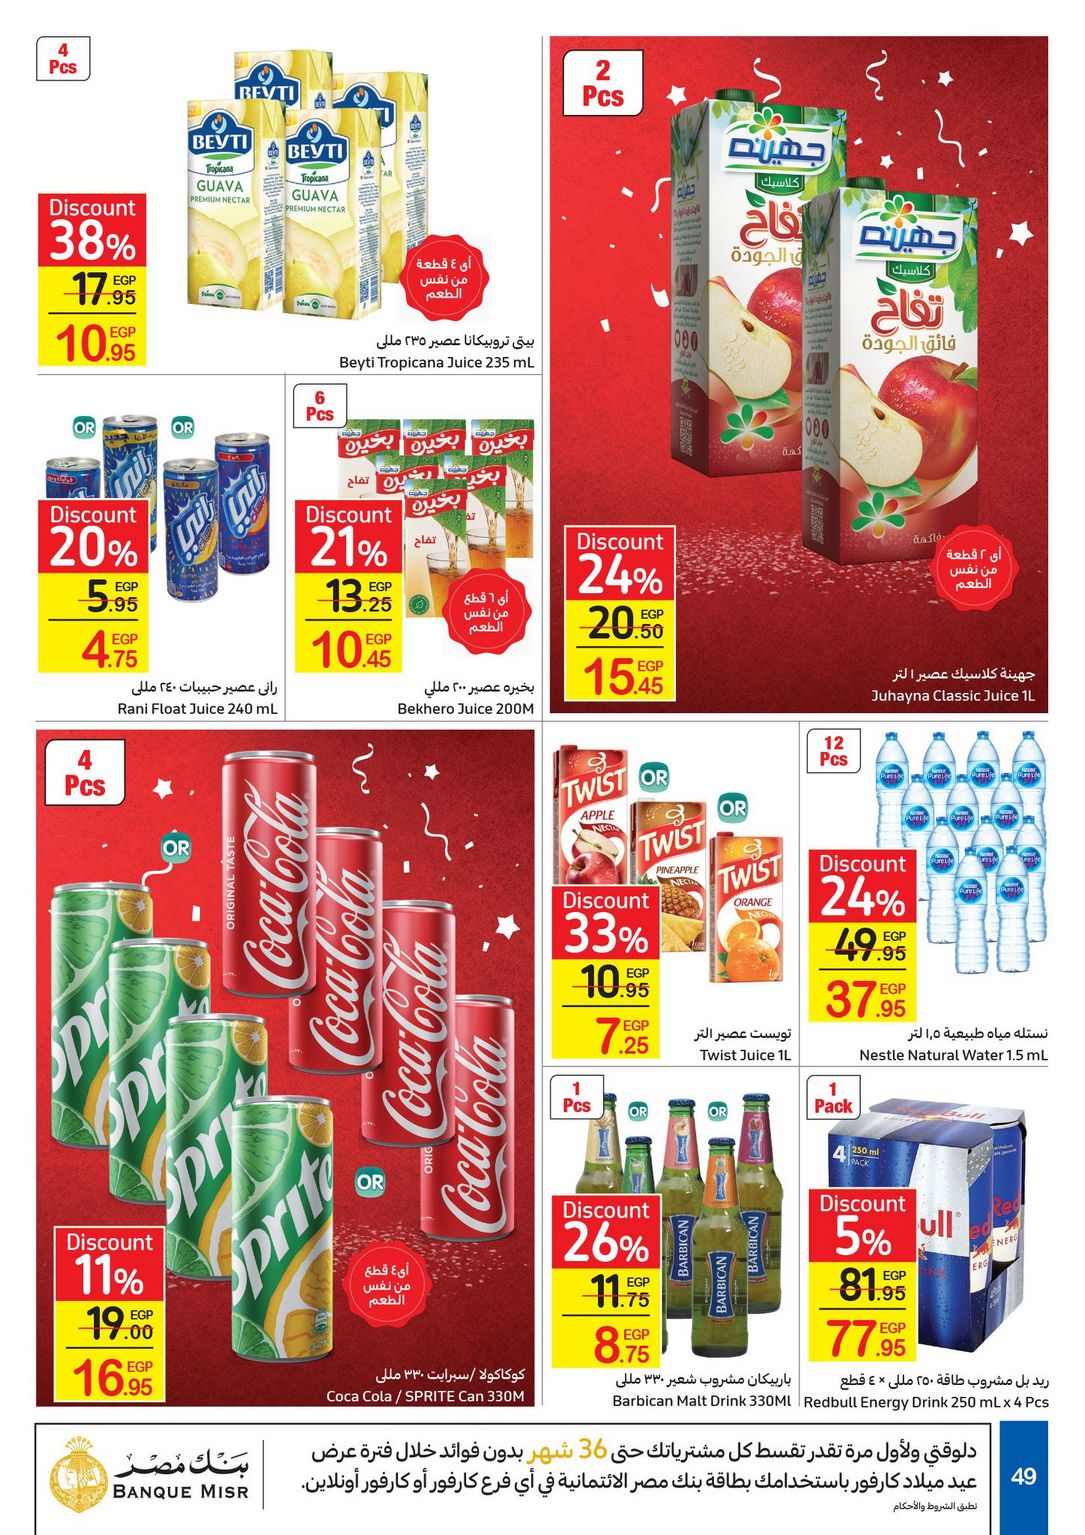 Carrefour Anniversary Offers till 18/2/2021 | Carrefour Egypt 51